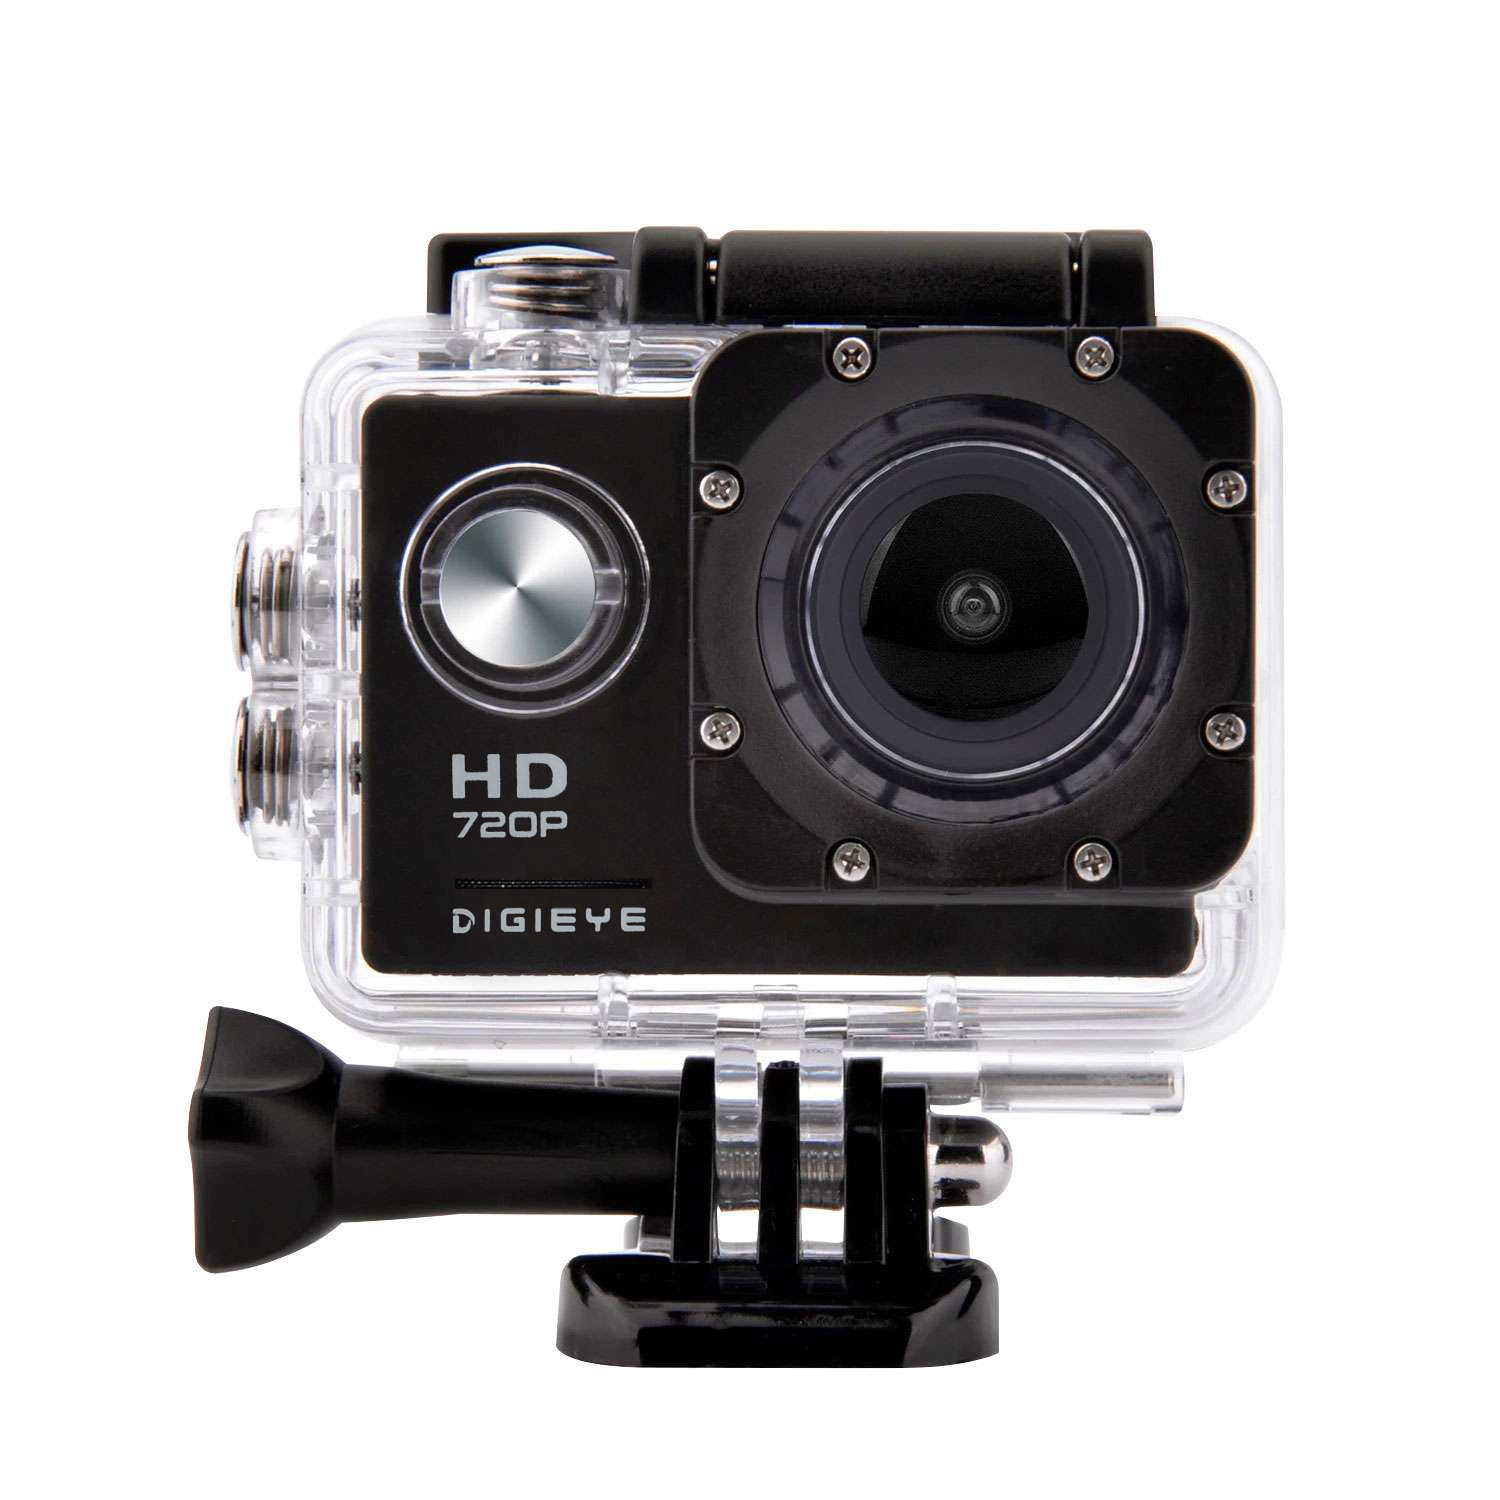 Digieye 720P HD Action Camera Kit with 8GB Micro SD Card